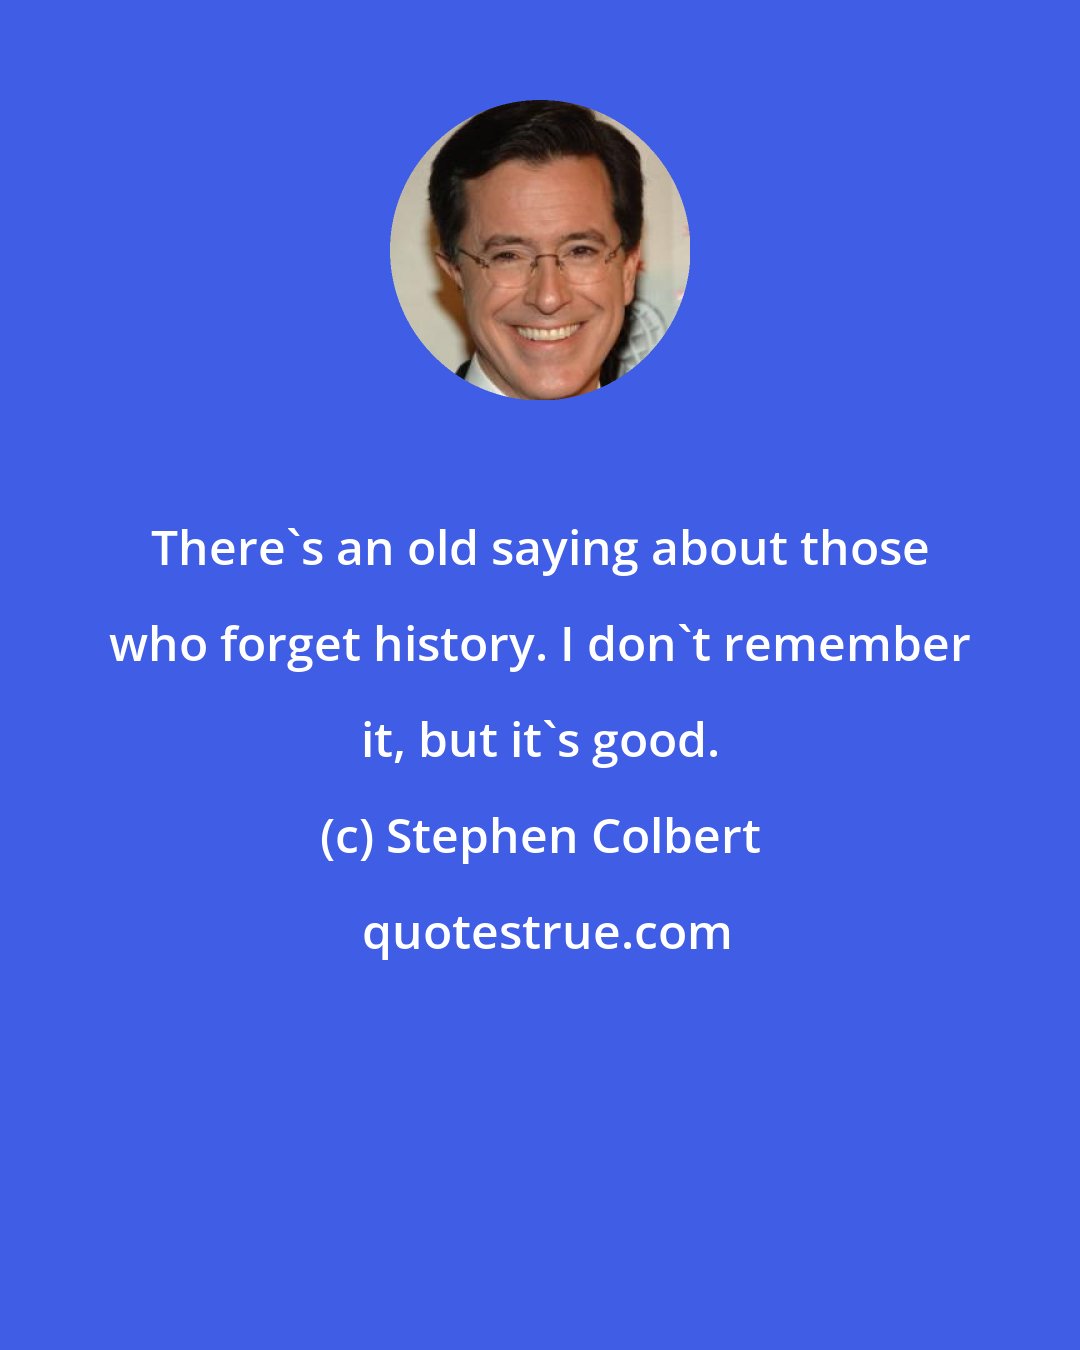 Stephen Colbert: There's an old saying about those who forget history. I don't remember it, but it's good.